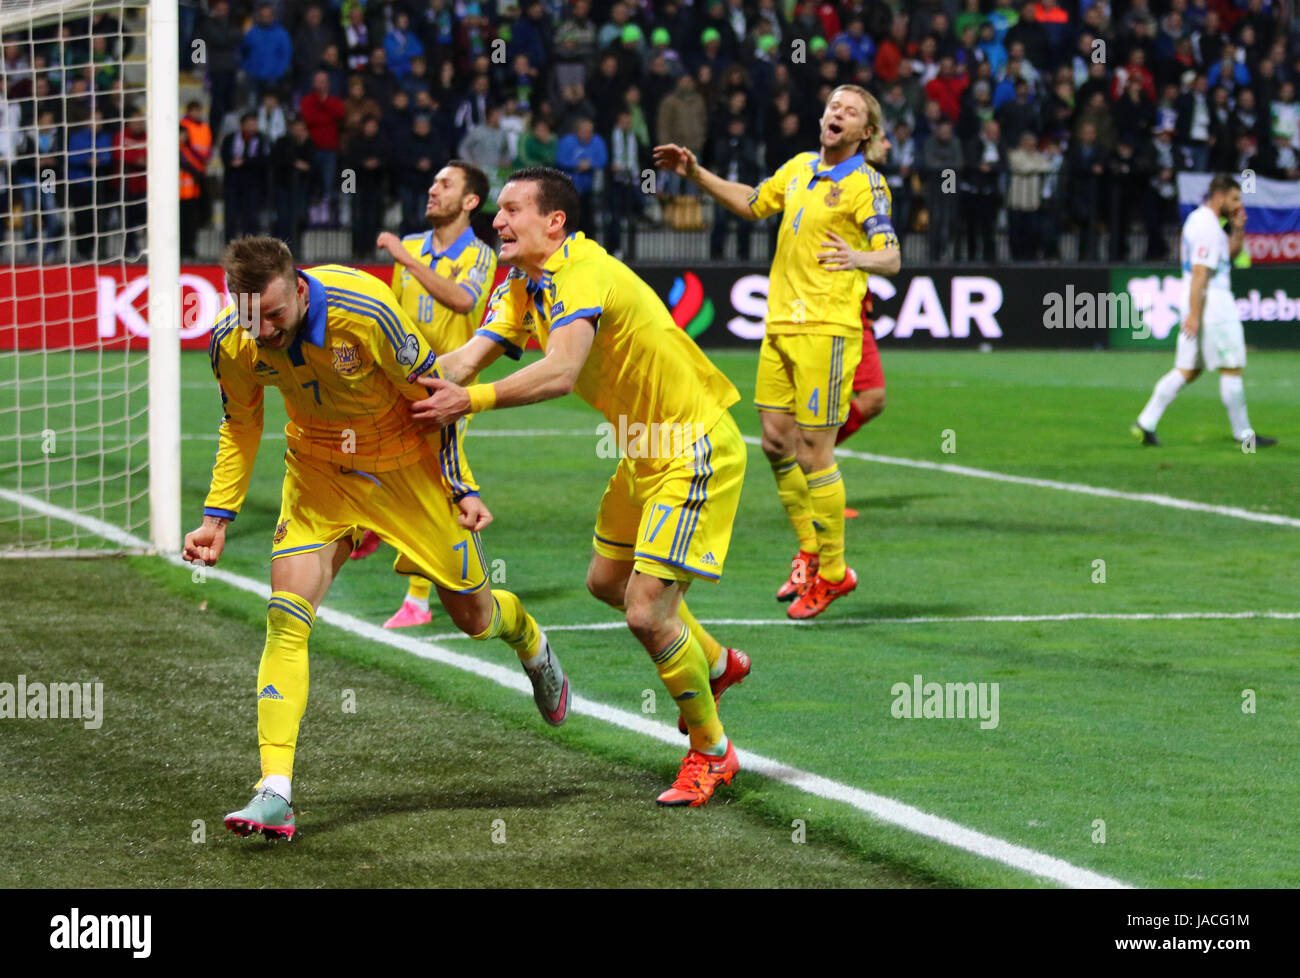 MARIBOR, SLOVENIA - NOVEMBER 17, 2015: Ukrainian footballers react after scored a goal during UEFA EURO 2016 Play-off for Final Tournament game agains Stock Photo